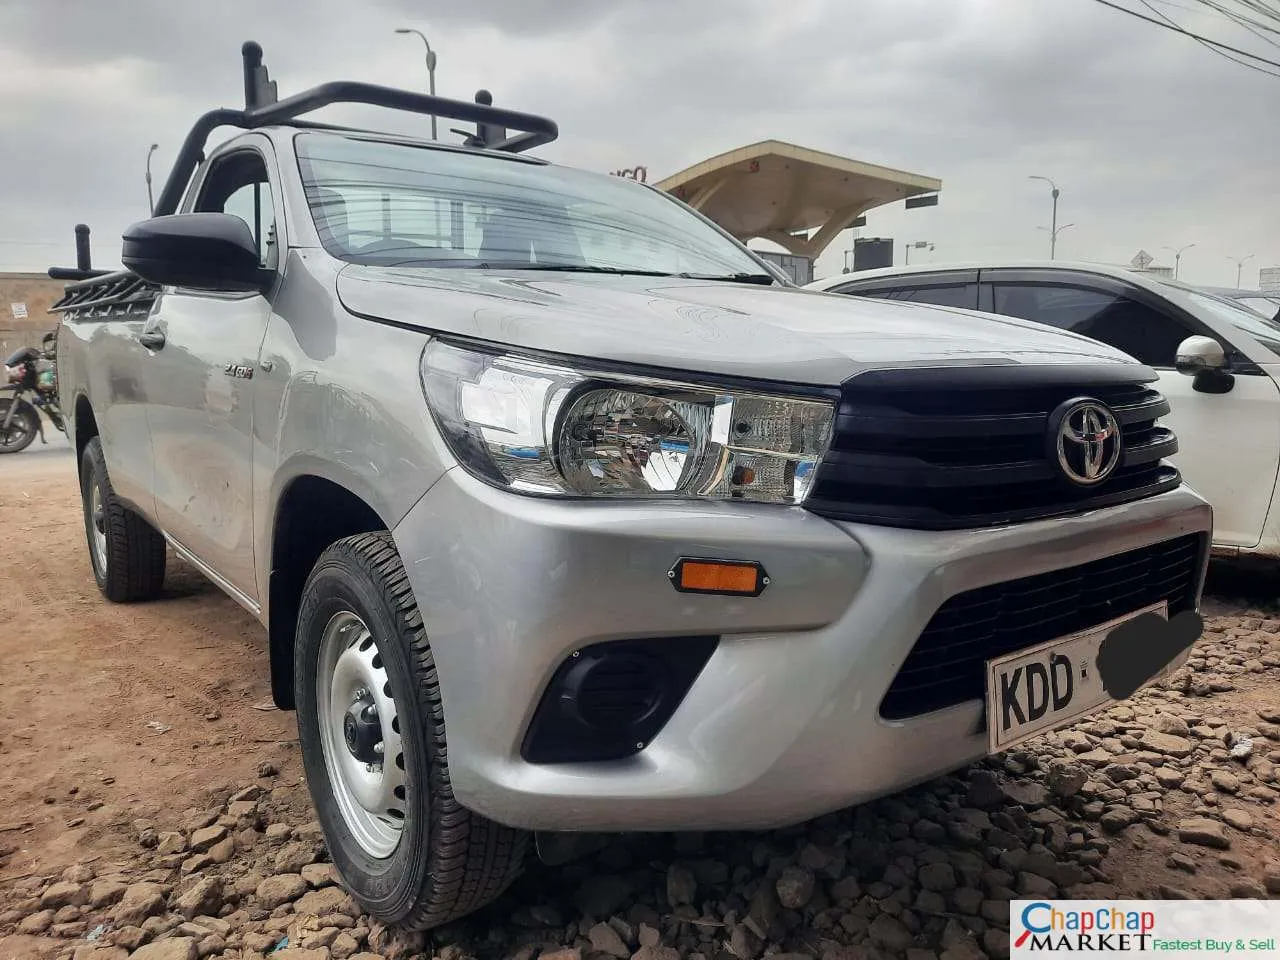 Cars Cars For Sale-Toyota Hilux for sale in Kenya You Pay 30% Deposit trade in OK EXCLUSIVE hire purchase installments bank finance ok 4